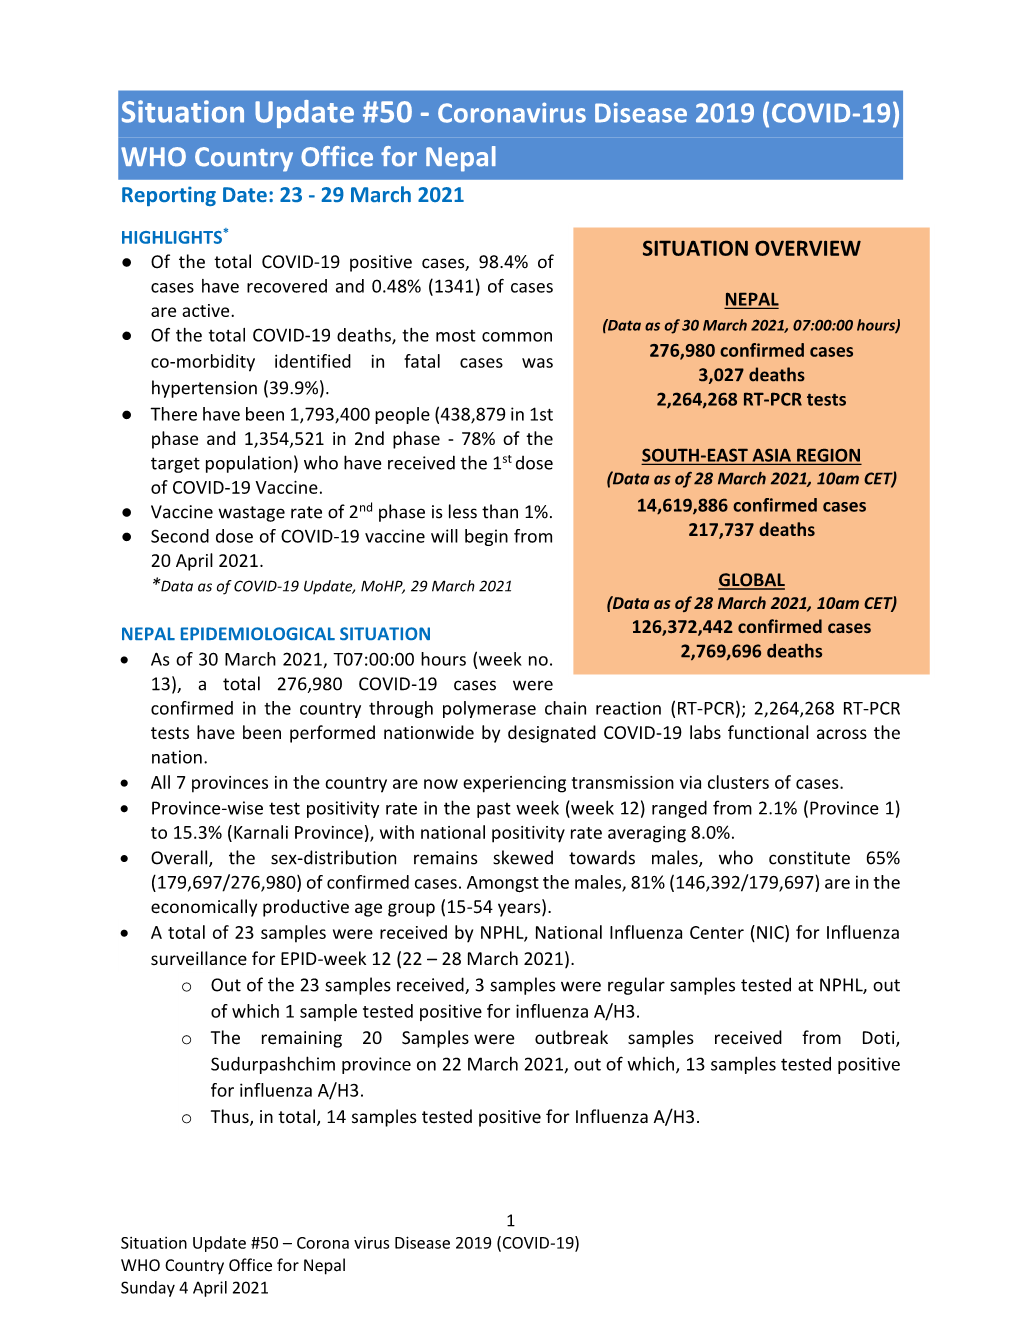 Situation Update #50 - Coronavirus Disease 2019 (COVID-19) WHO Country Office for Nepal Reporting Date: 23 - 29 March 2021